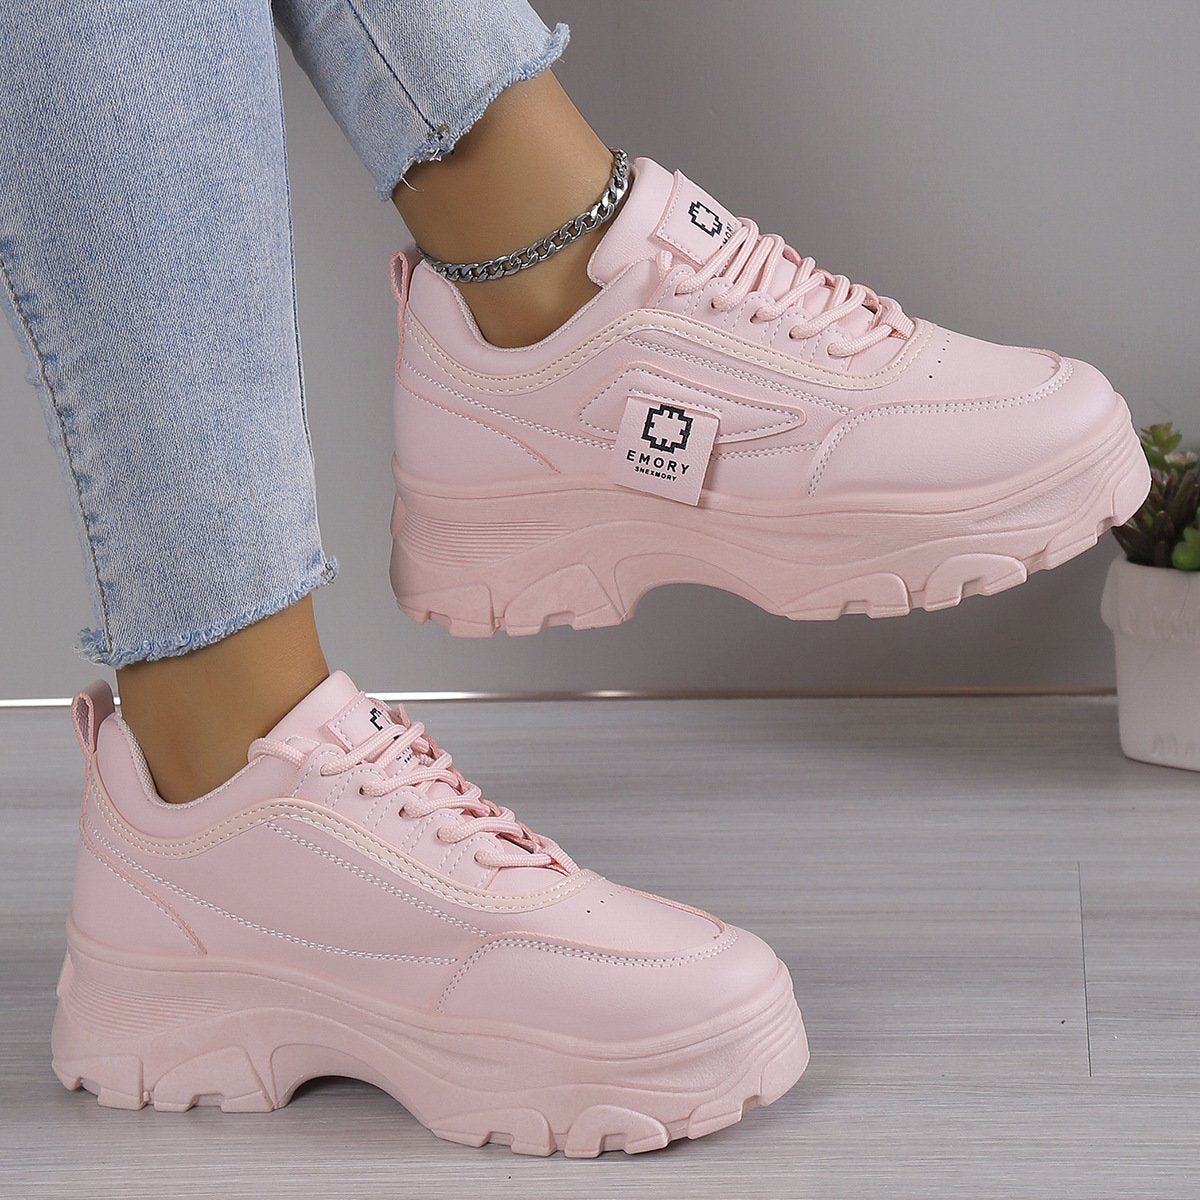 Candy-colored platform soled fashion sneakers